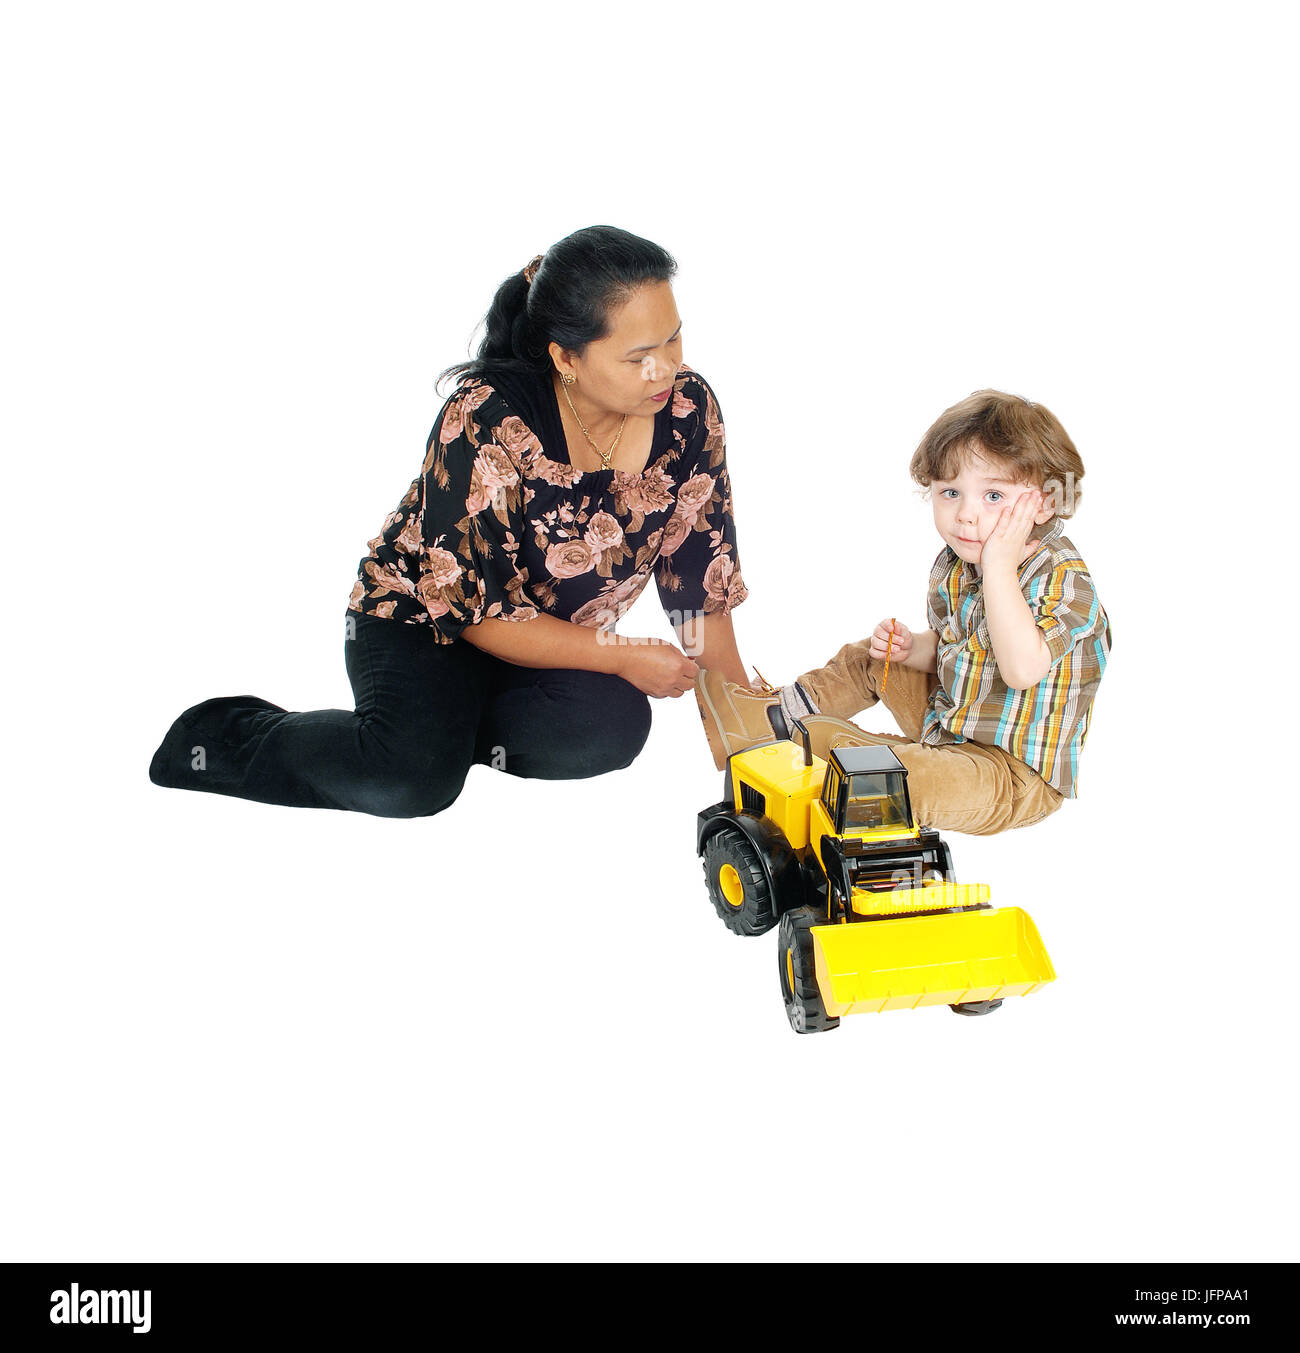 Nanny plays with little boy. Stock Photo